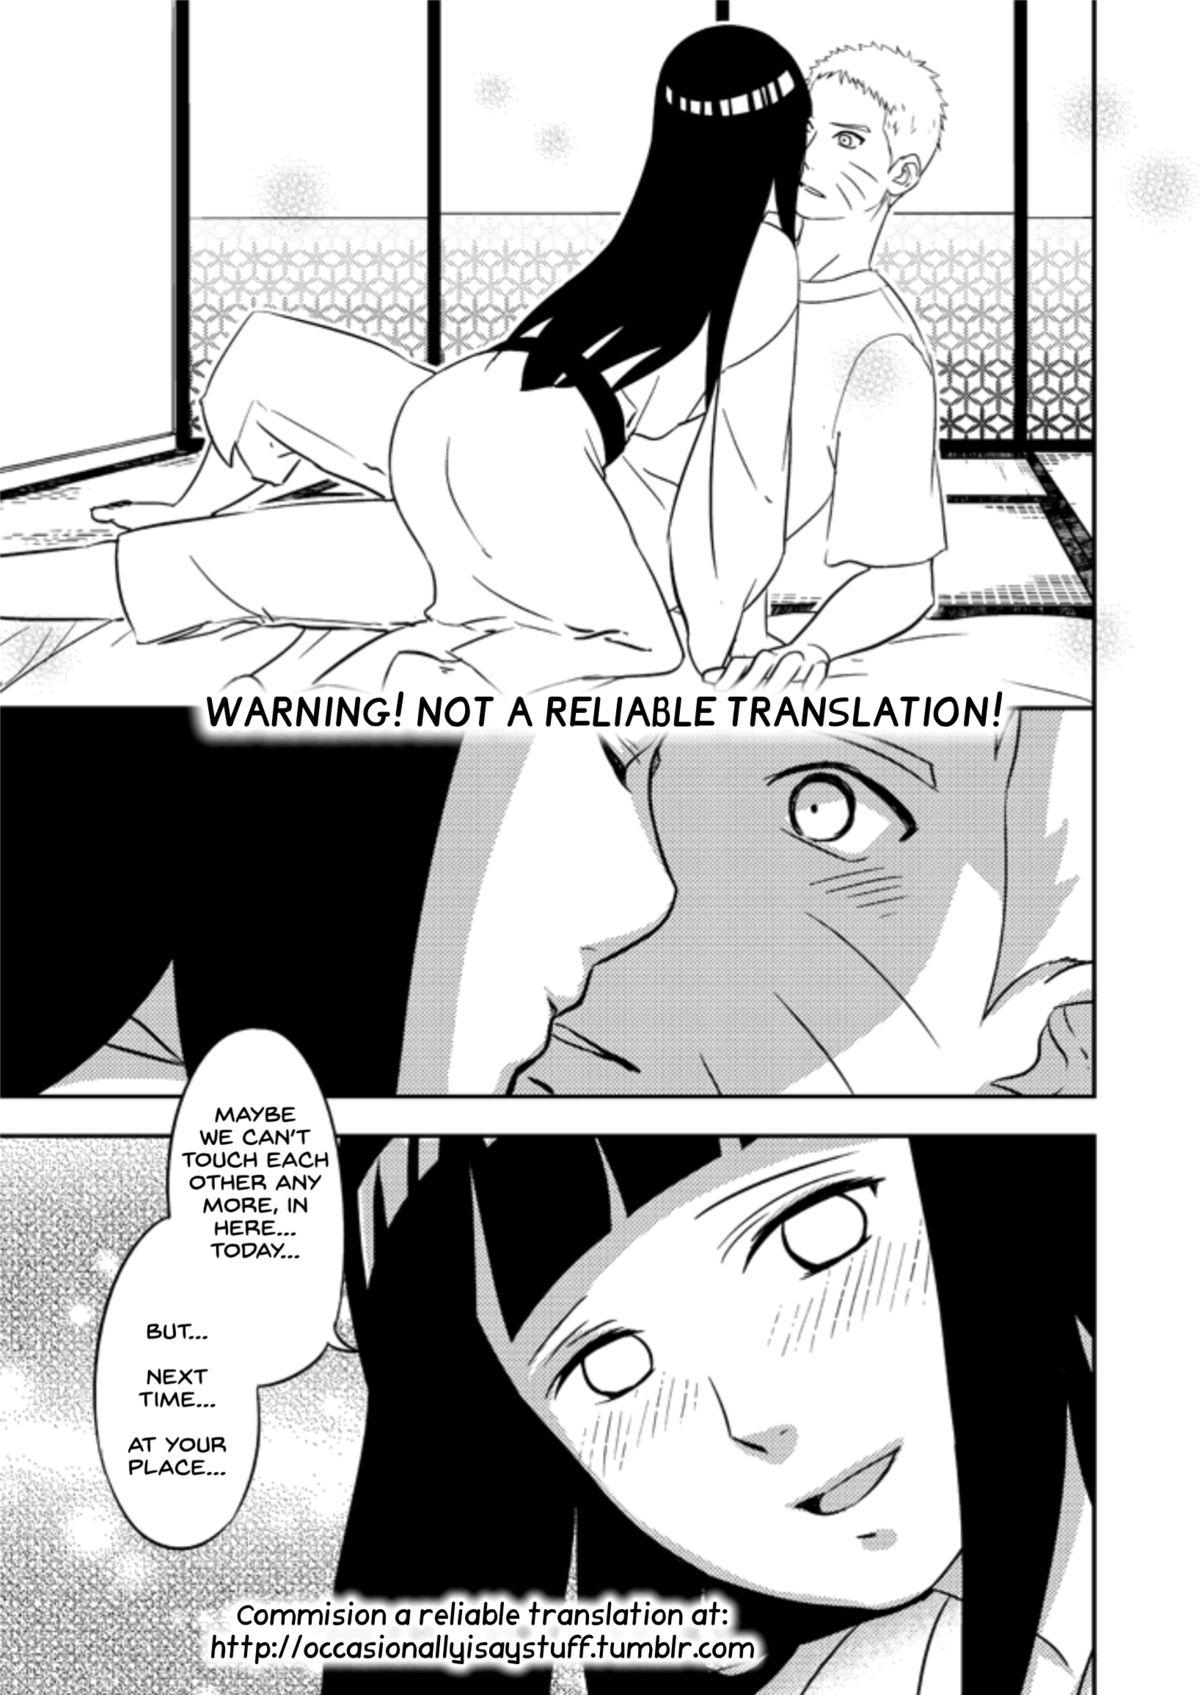 Spa A trip to the Hyuga Onsen - Naruto Reversecowgirl - Page 22